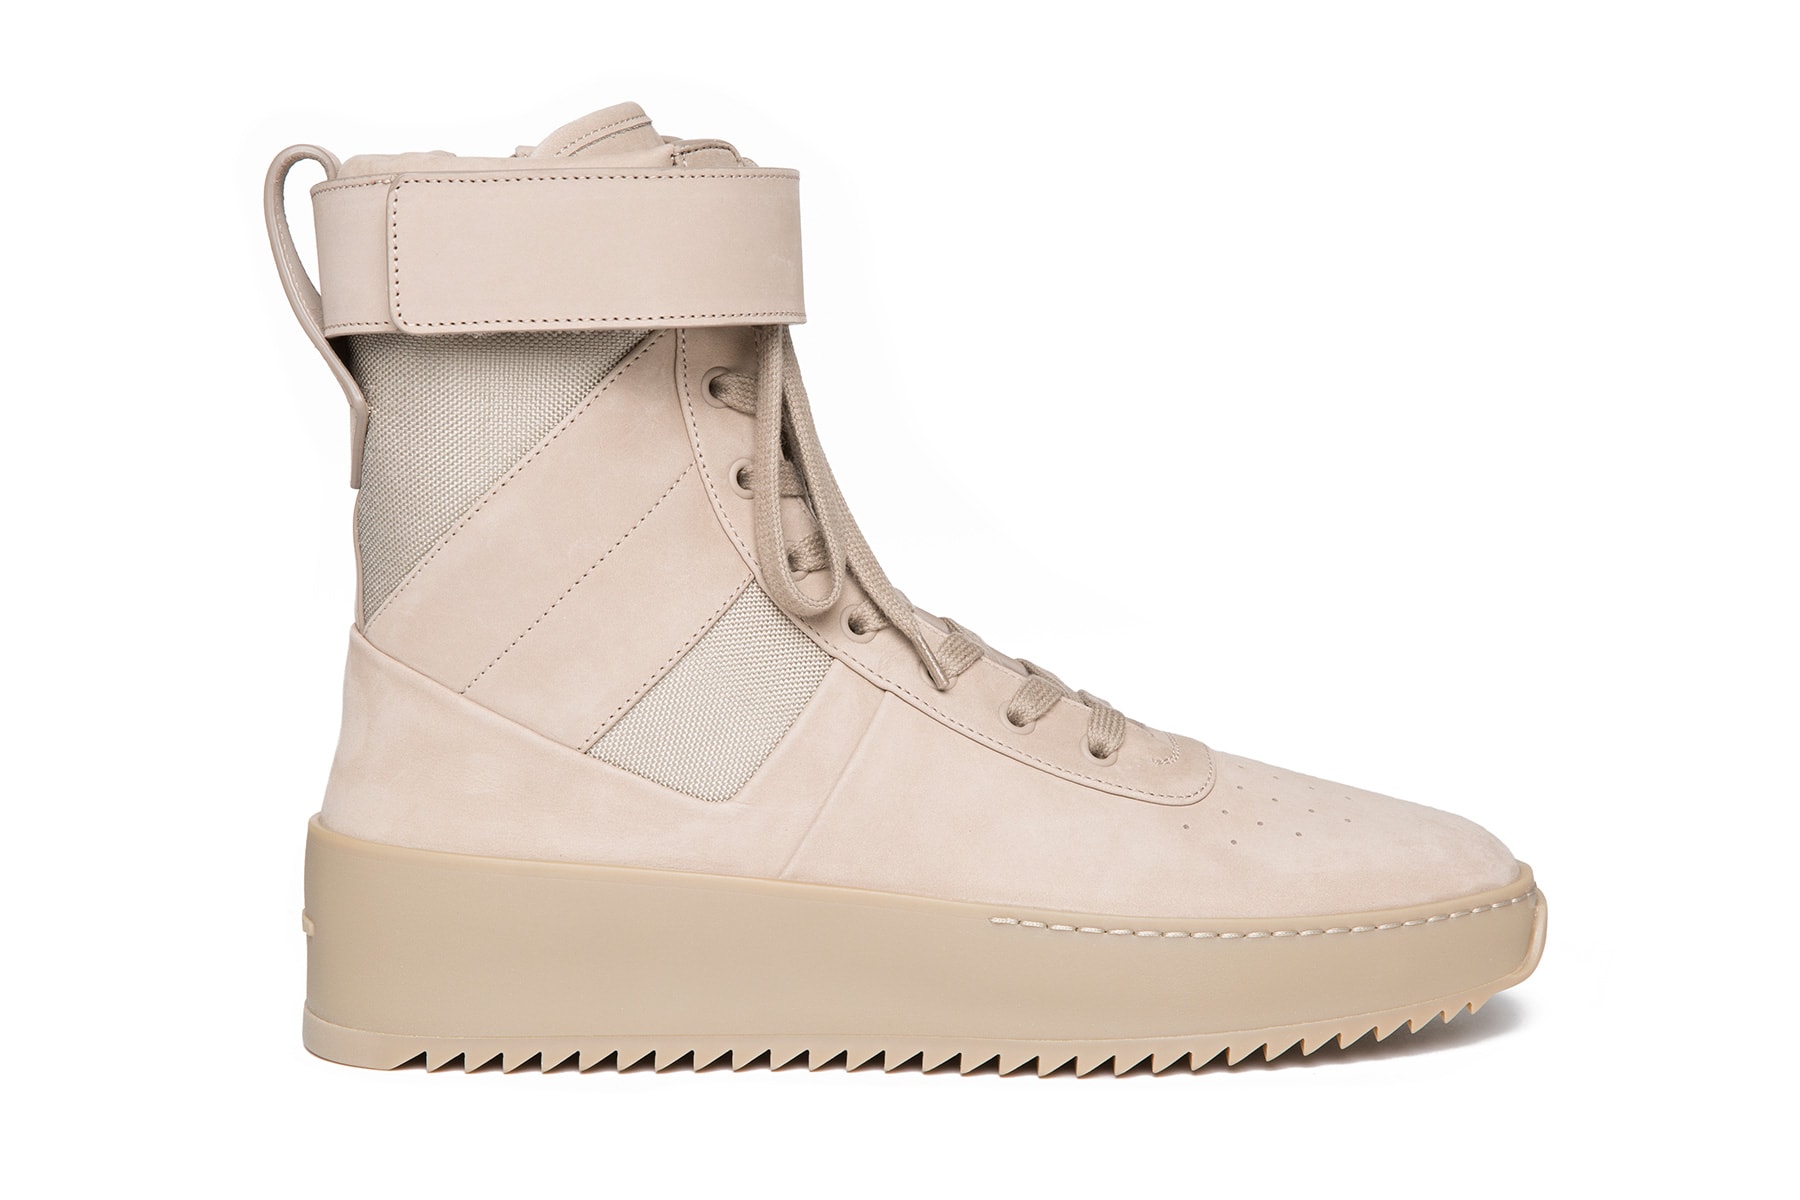 Fear of God Archive Military Sneaker Cyber Monday Deal 2017